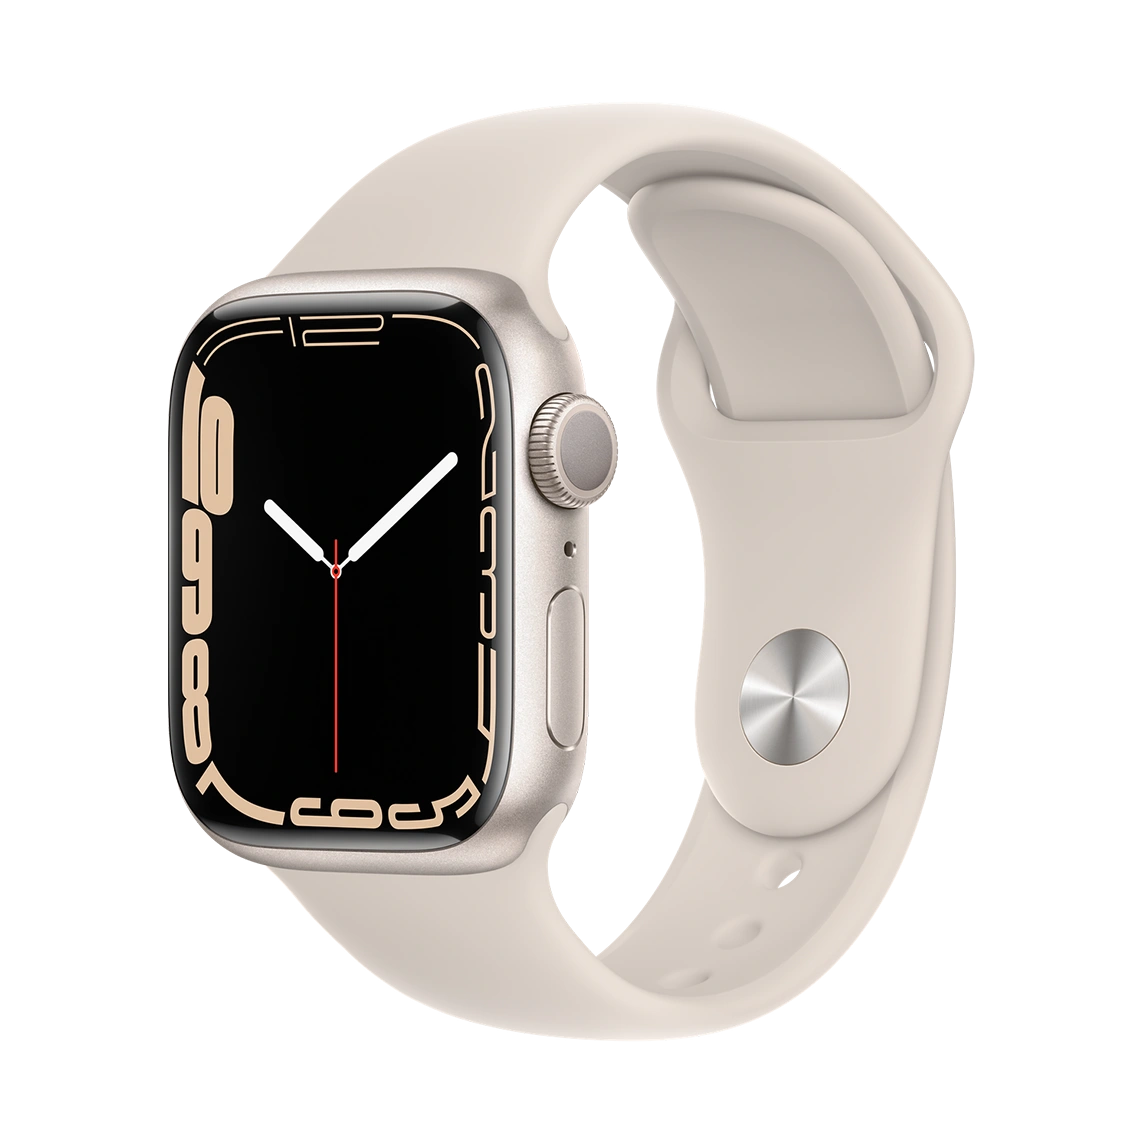 Apple Watch Series 7 Starlight Aluminum Case with Starlight Silicone Band